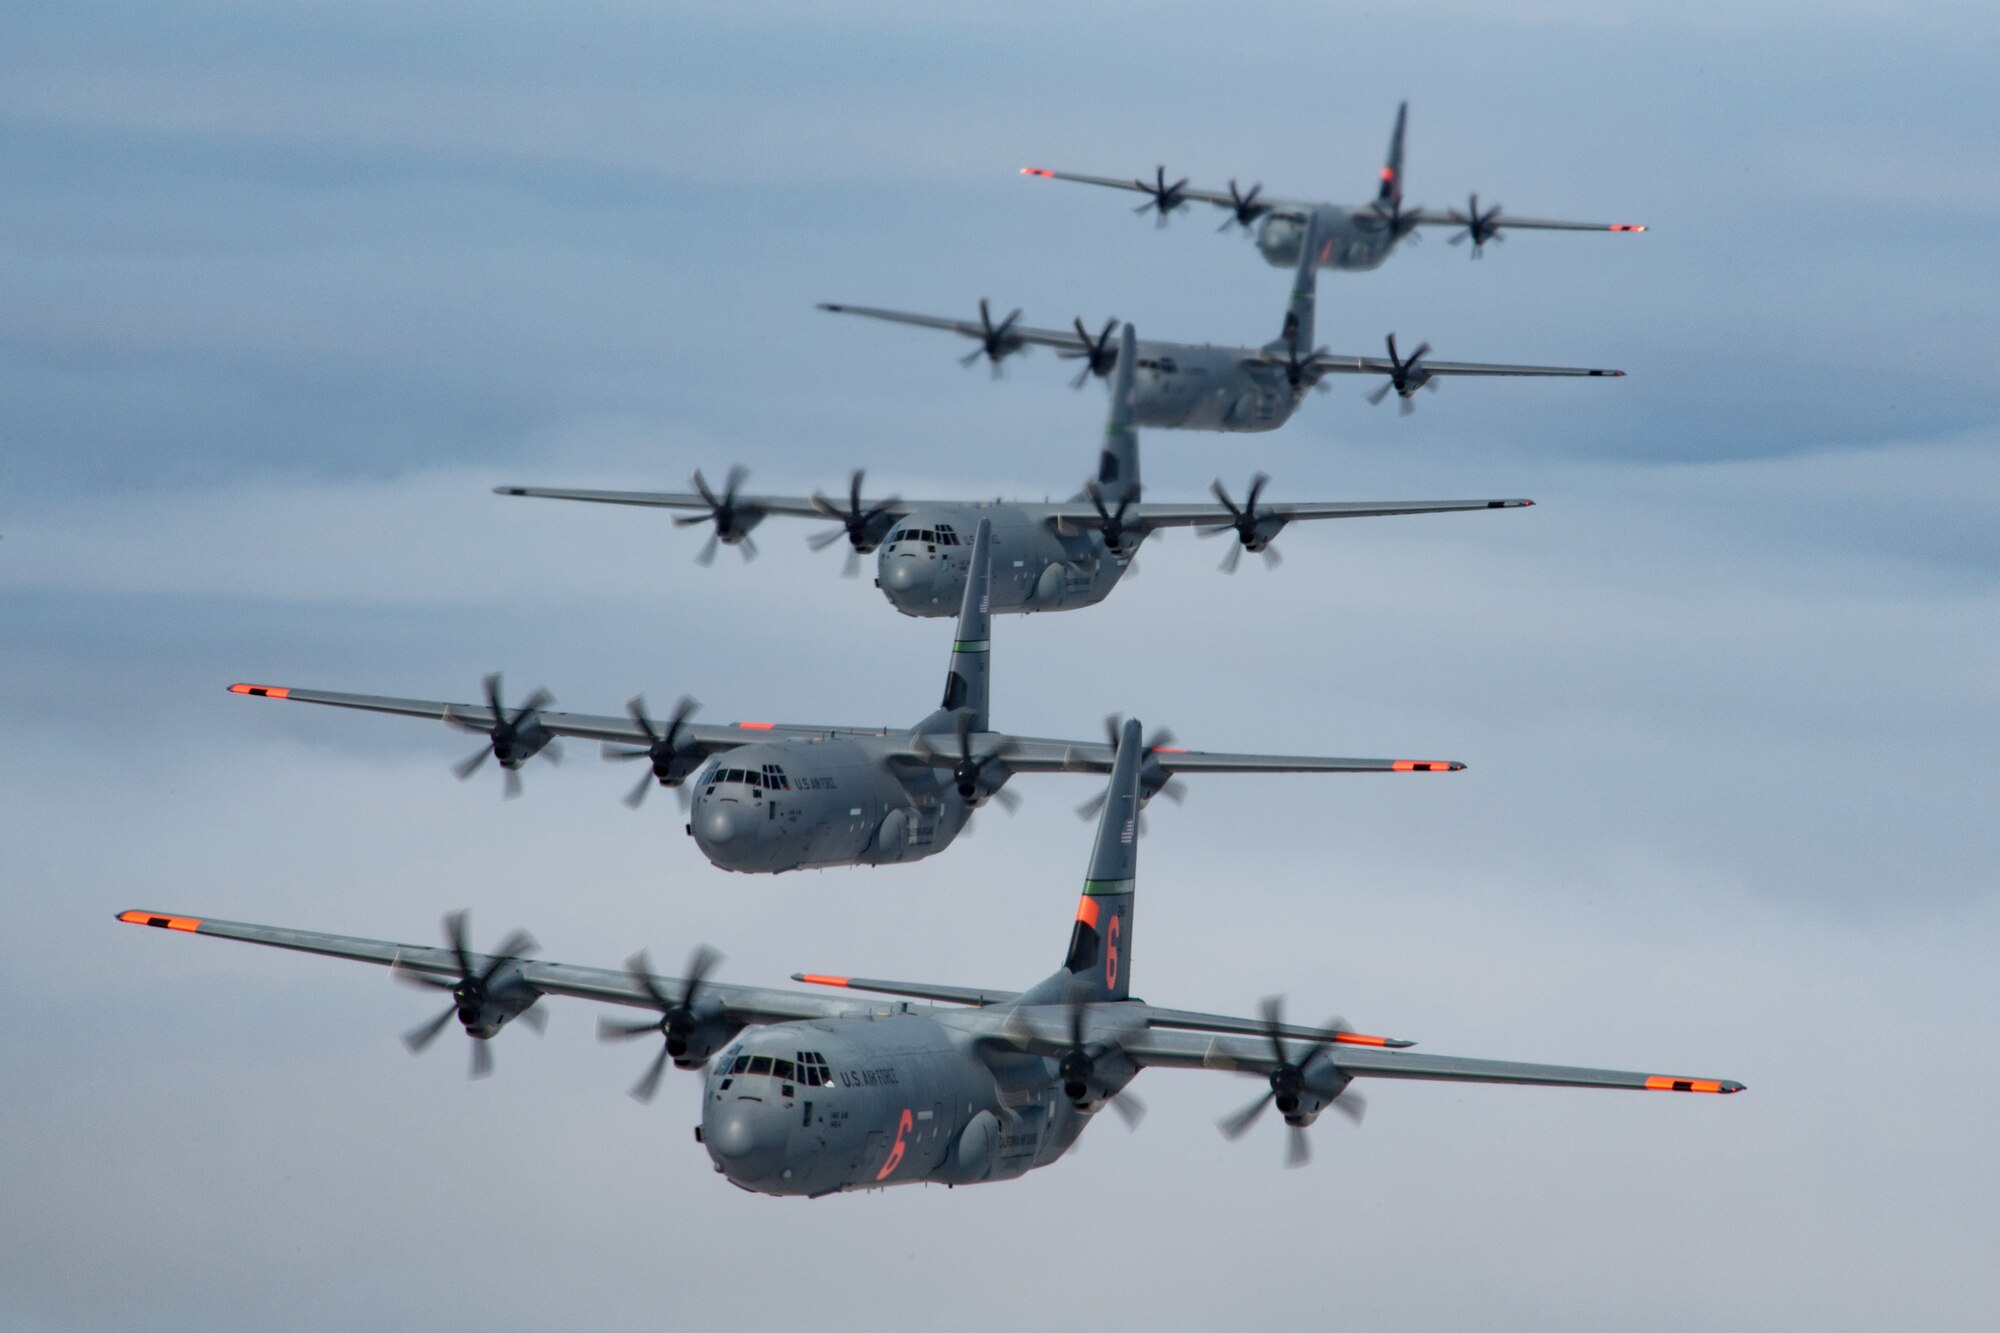 5 (of 6) California Air National Guard C-130J Super Hercules aircraft fly in tight formation over the Pacific Ocean, California. May 27, 2020. California Air National Guard maintainers from the 146th Maintenance Group and aircrew from the 115th Airlift Squadron, collaborated to accomplish the launching of 6 C-130J Super Hercules aircraft for the first time in over 20 years U.S. Air National Guard by Tech. Sgt. Nieko Carzis.